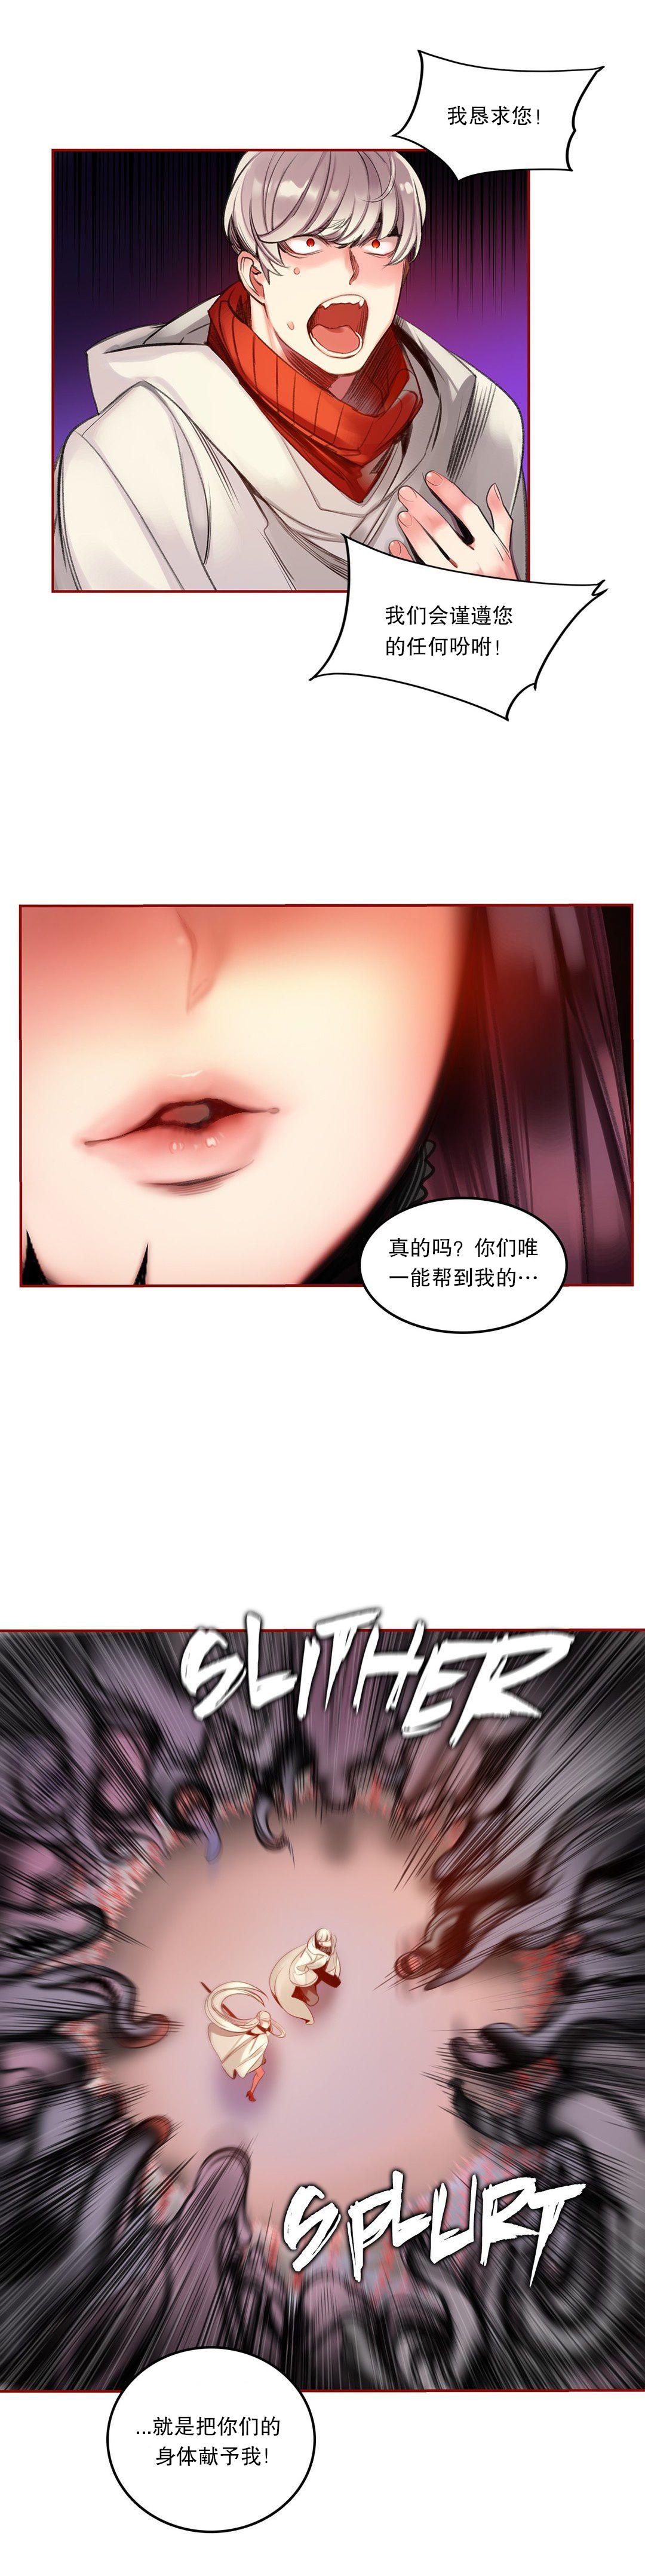 [Juder] Lilith`s Cord (第二季) Ch.61-66 [Chinese] [aaatwist个人汉化] [Ongoing] 86